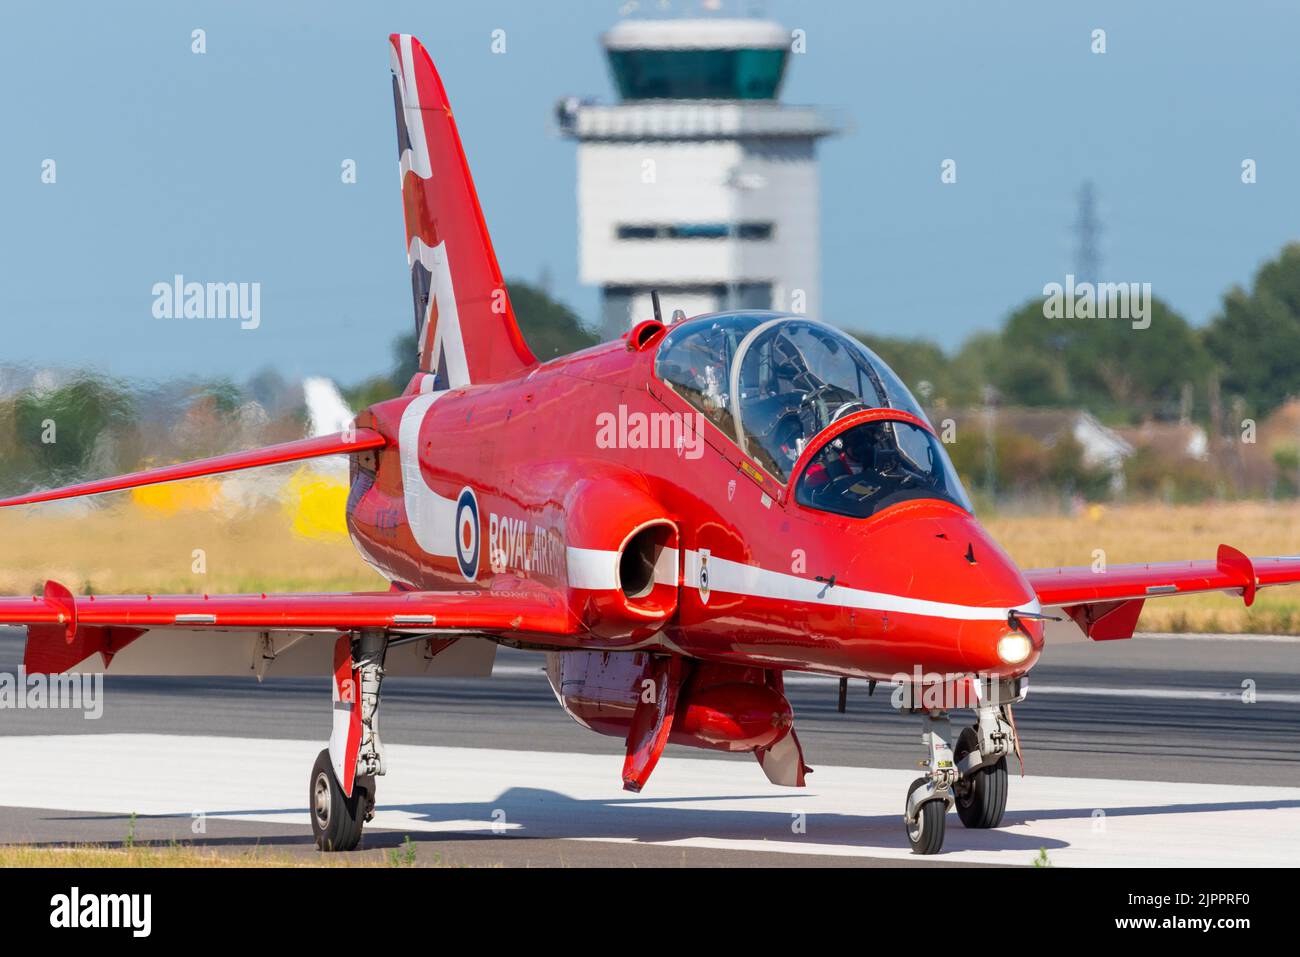 Royal Air Force Red Arrows display team BAe Hawk T.1 jet plane after landing at London Southend Airport for weekend of airshows. Air Traffic tower Stock Photo